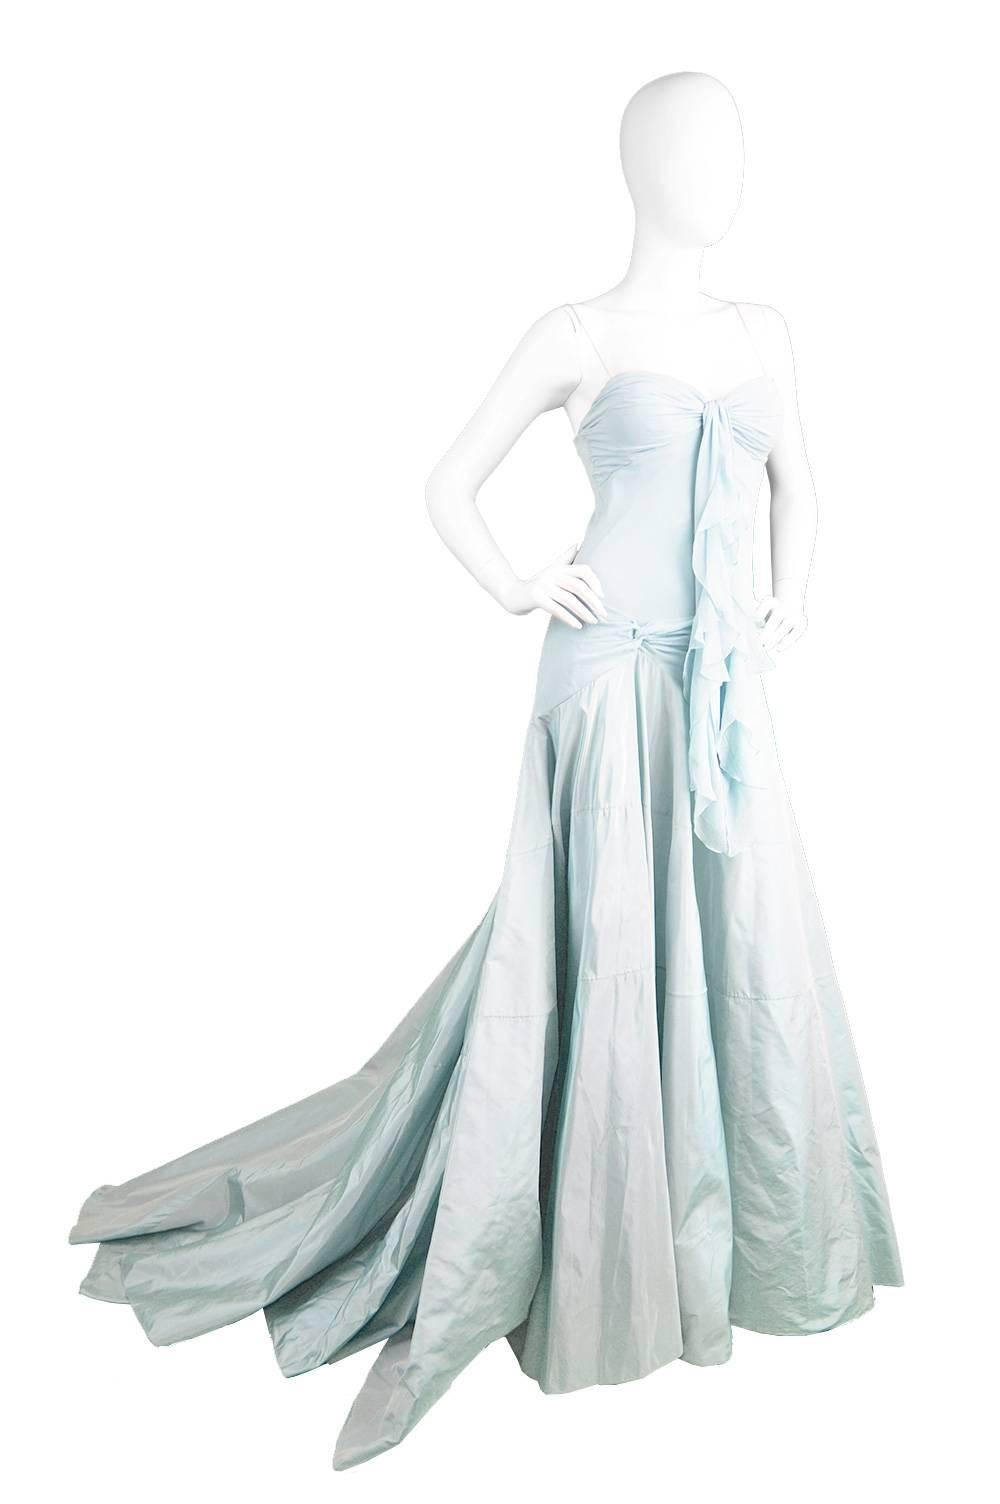 A showstopping evening gown by John Galliano for Christian Dior, c. 1990's in a bias cut silk chiffon with silk taffeta train.

Estimated Size: UK 6/ US 2/ EU 34
Bust - 31” / 79cm
Waist - 28” / 71cm
Hips - Up to 36” / 91cm
Length (Bust to Hem